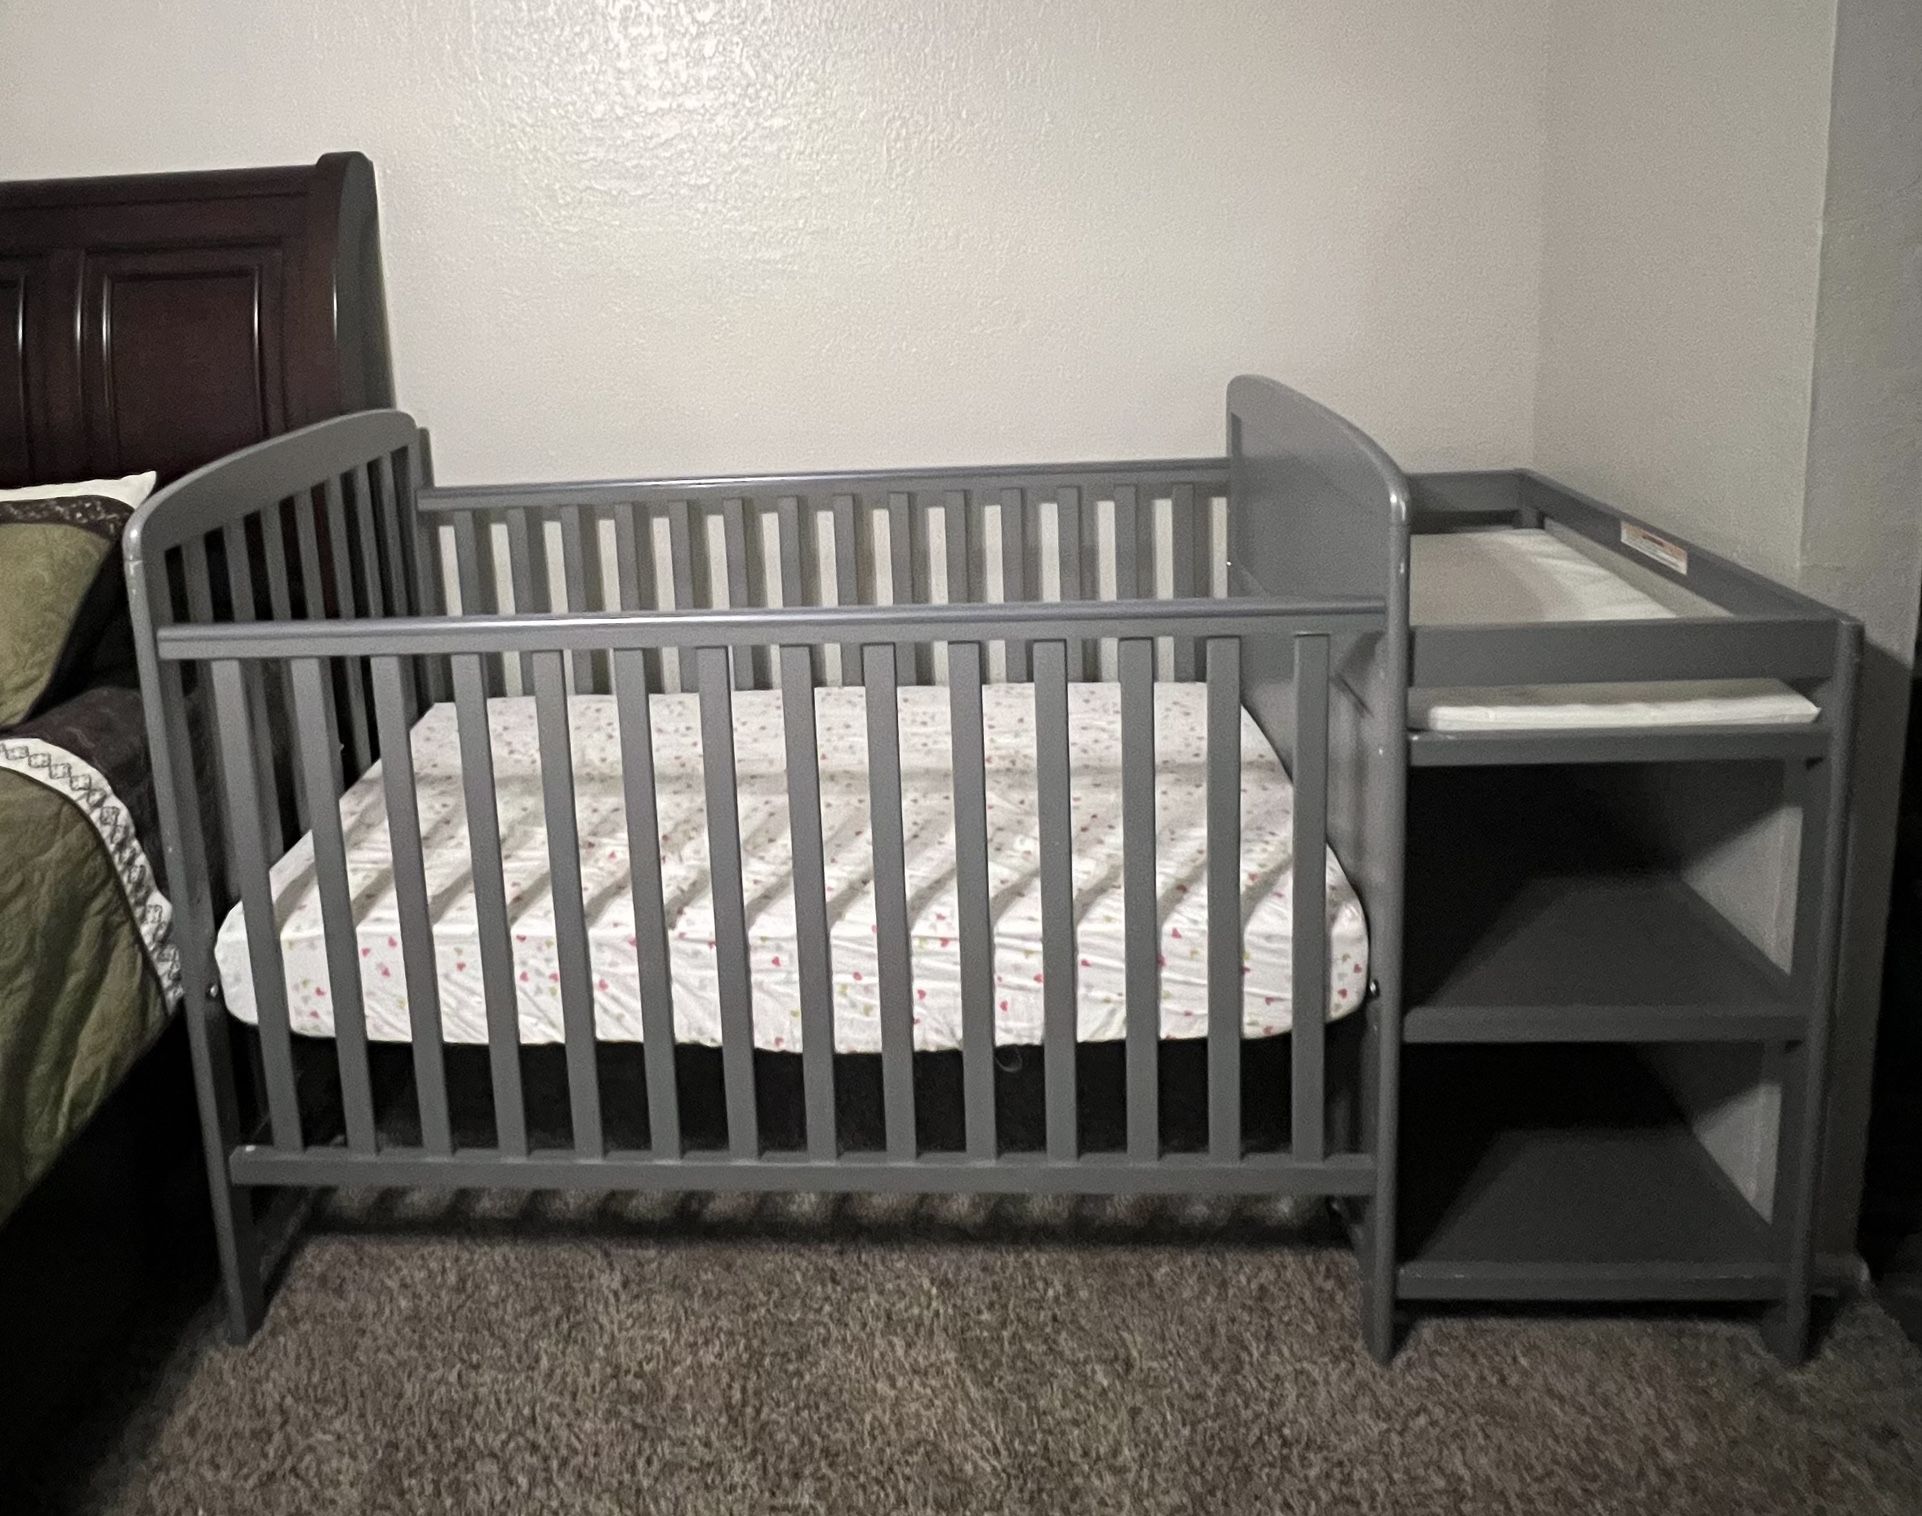 Full Size Crib & Changing Table, Mattress Included 